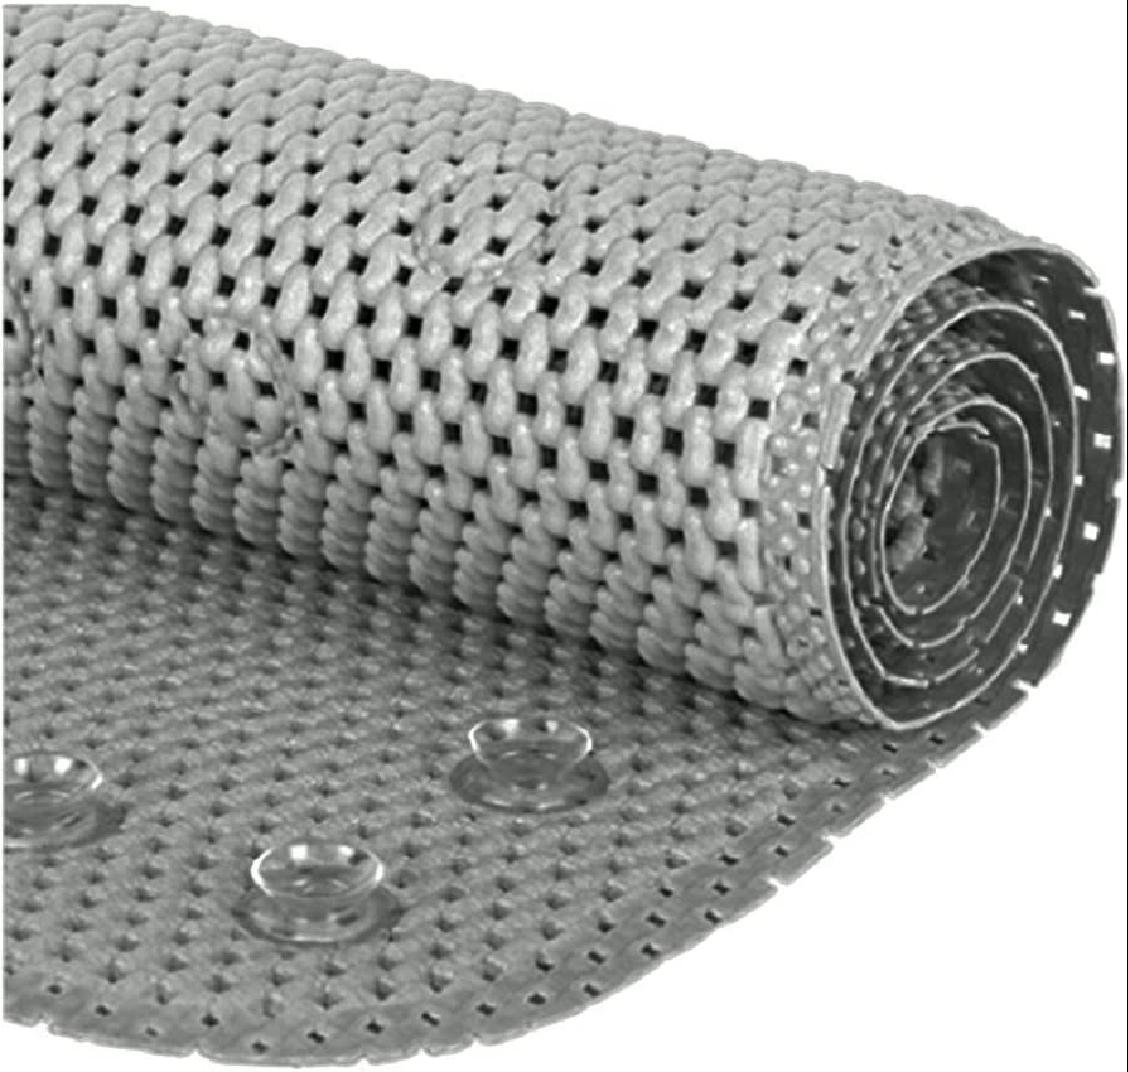 Magrans Plastic / Acrylic Shower Mat with Non-Slip Backing